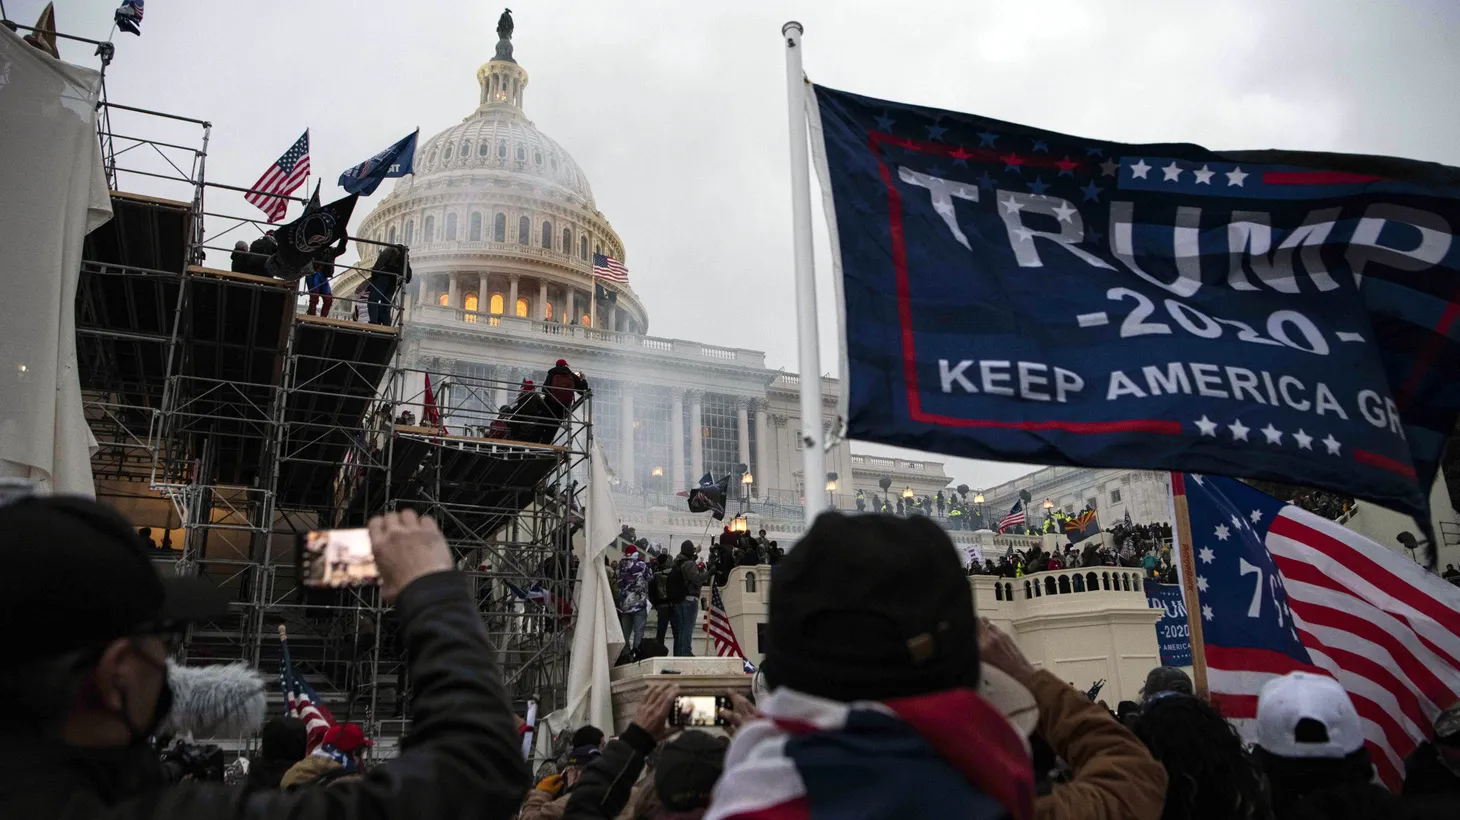 A scene from Capitol Hill, after protesters stormed the U.S. Capitol Building while Congress met to certify electoral votes confirming Joe Biden as president in Washington, D.C. on Jan. 6, 2021.